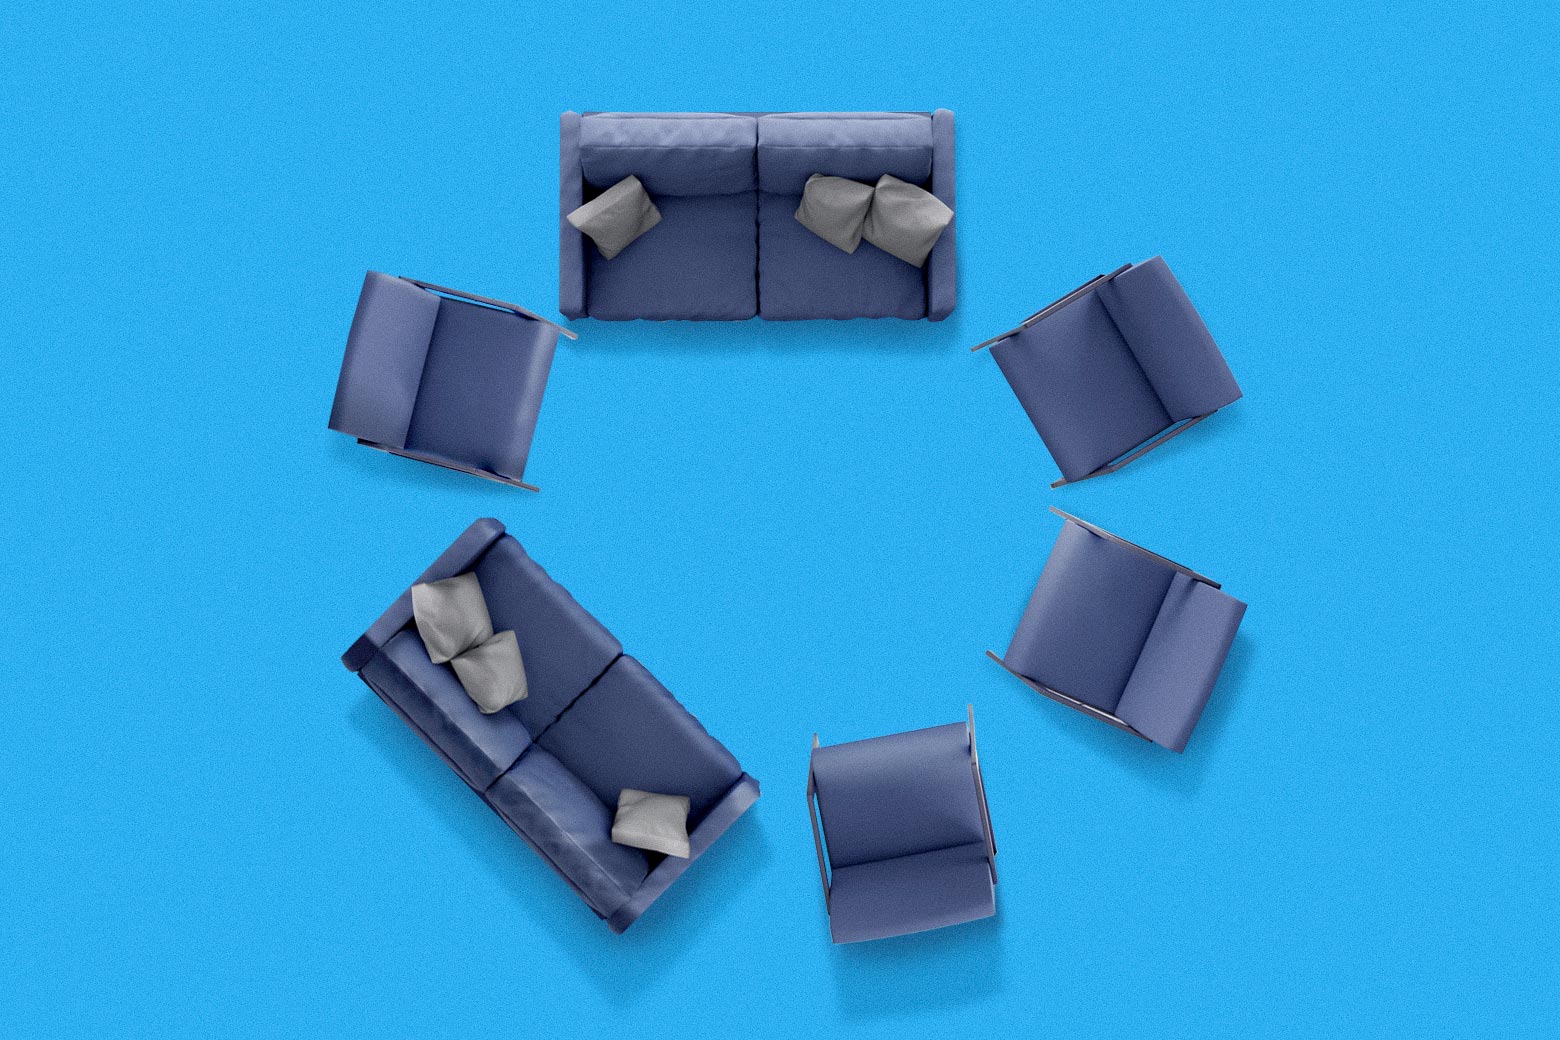 Blue sofas and sofa chairs are arranged in a discussion circle against a blue backdrop.  